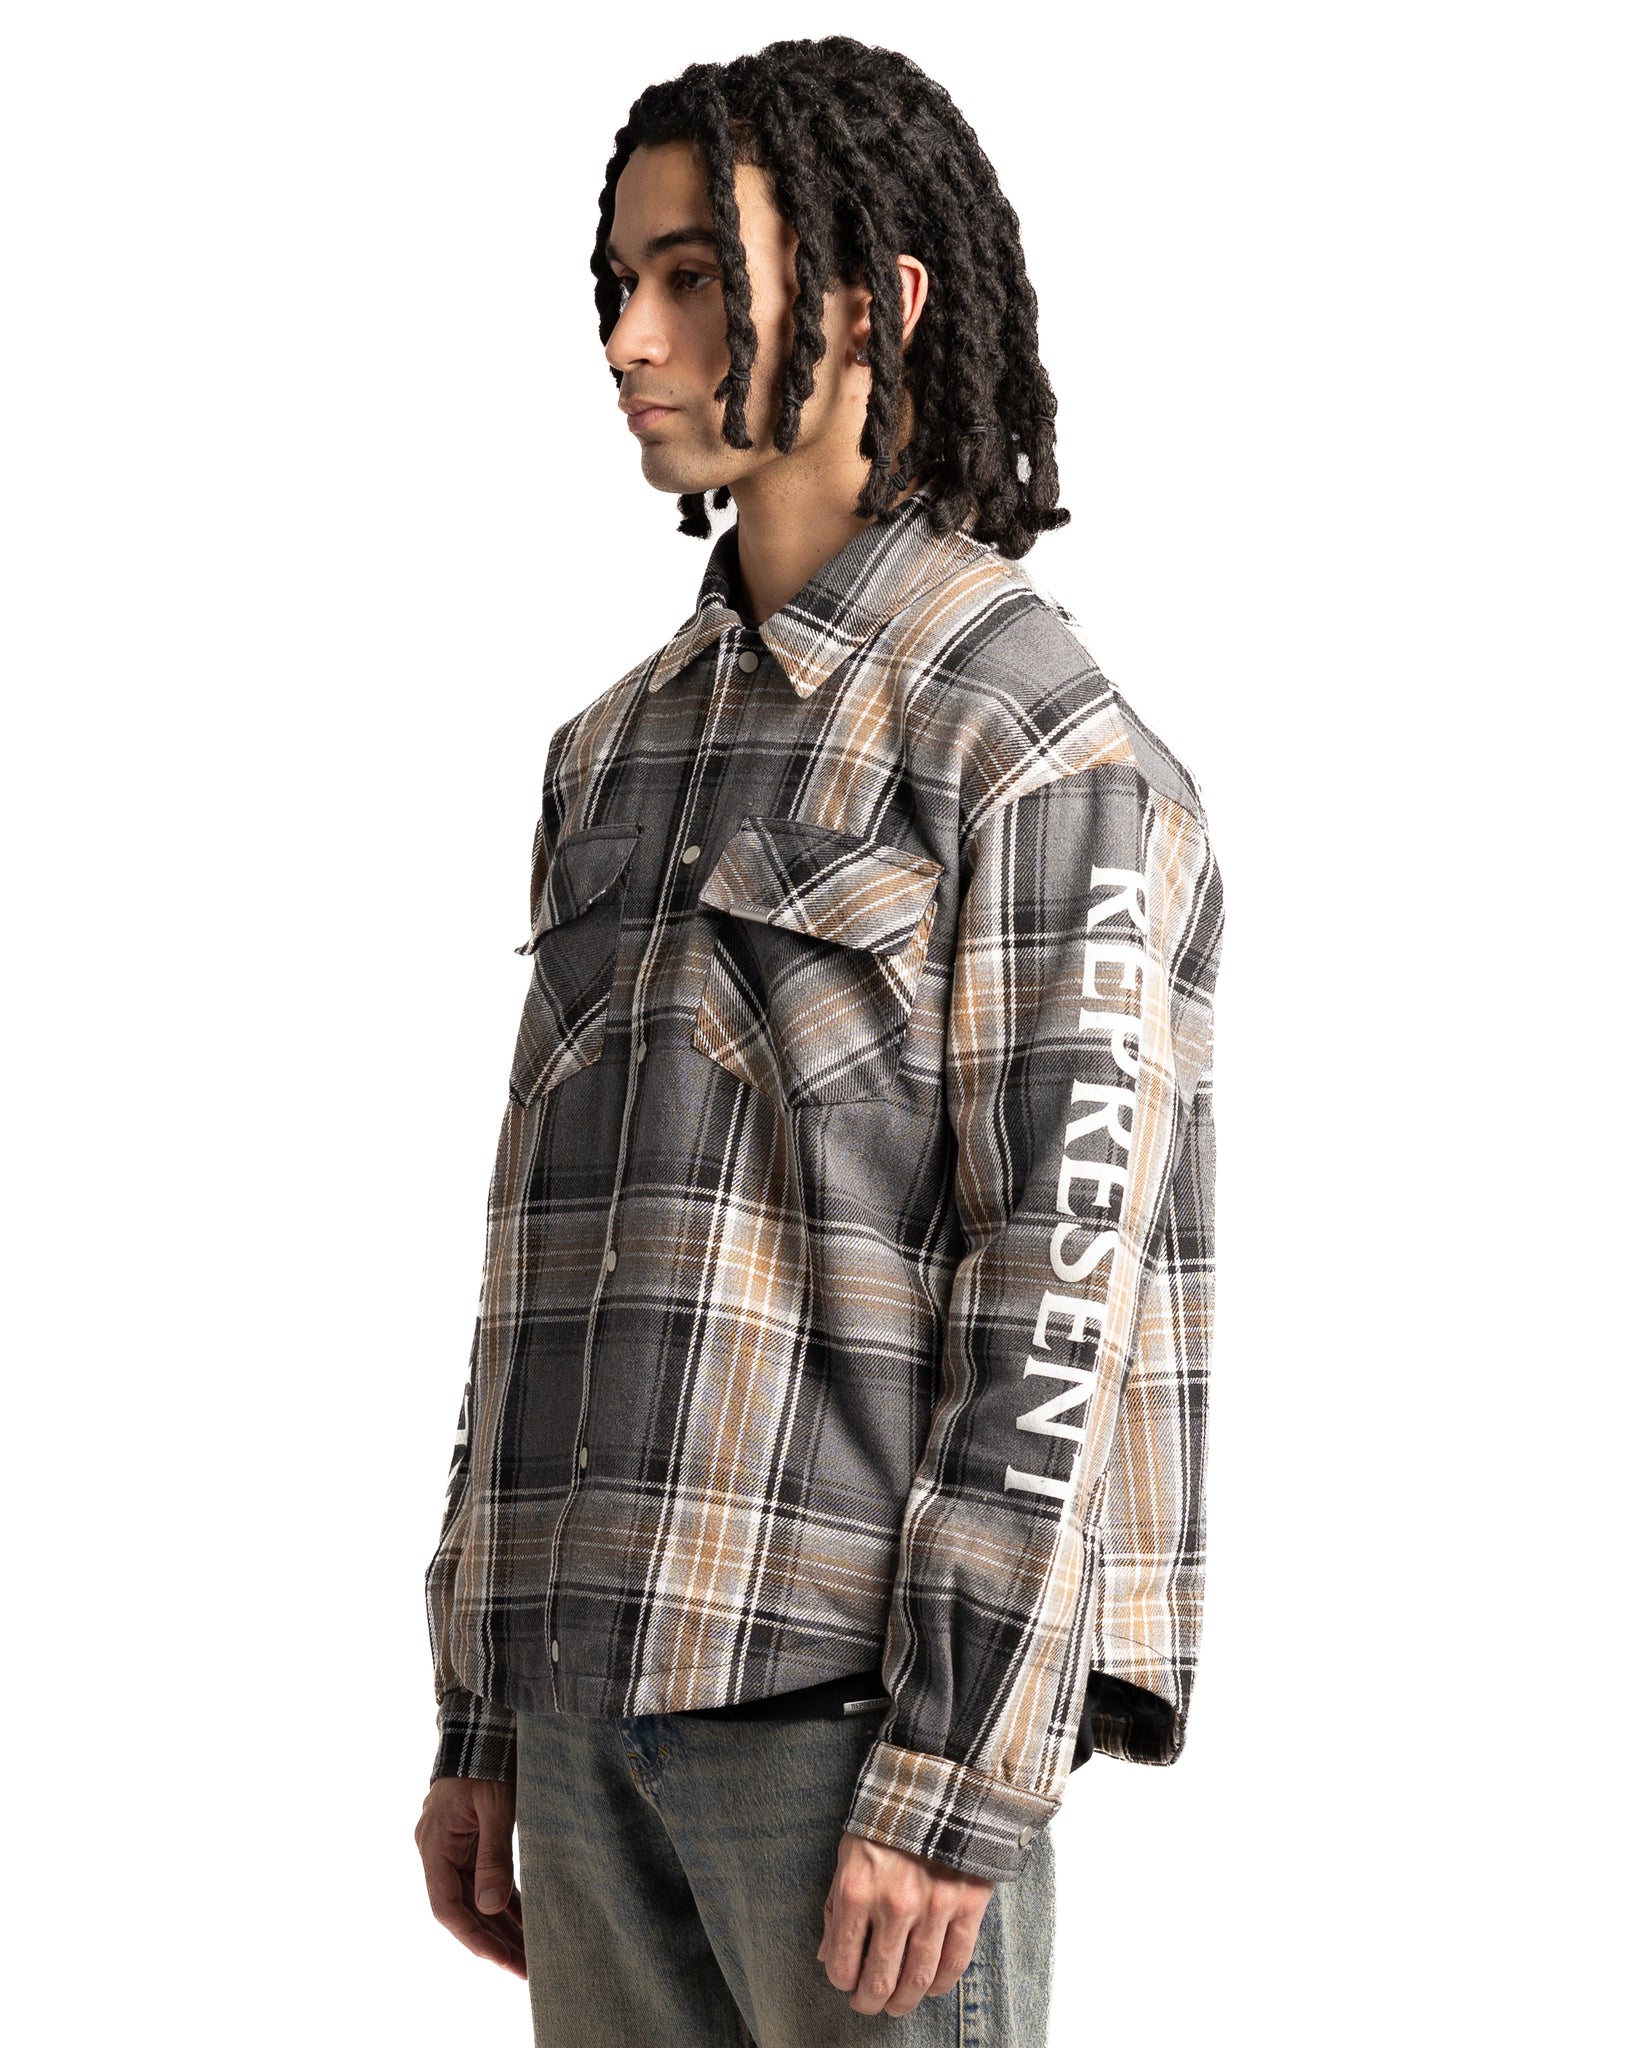 Represent Quilted Flannel Shirt Grey Check